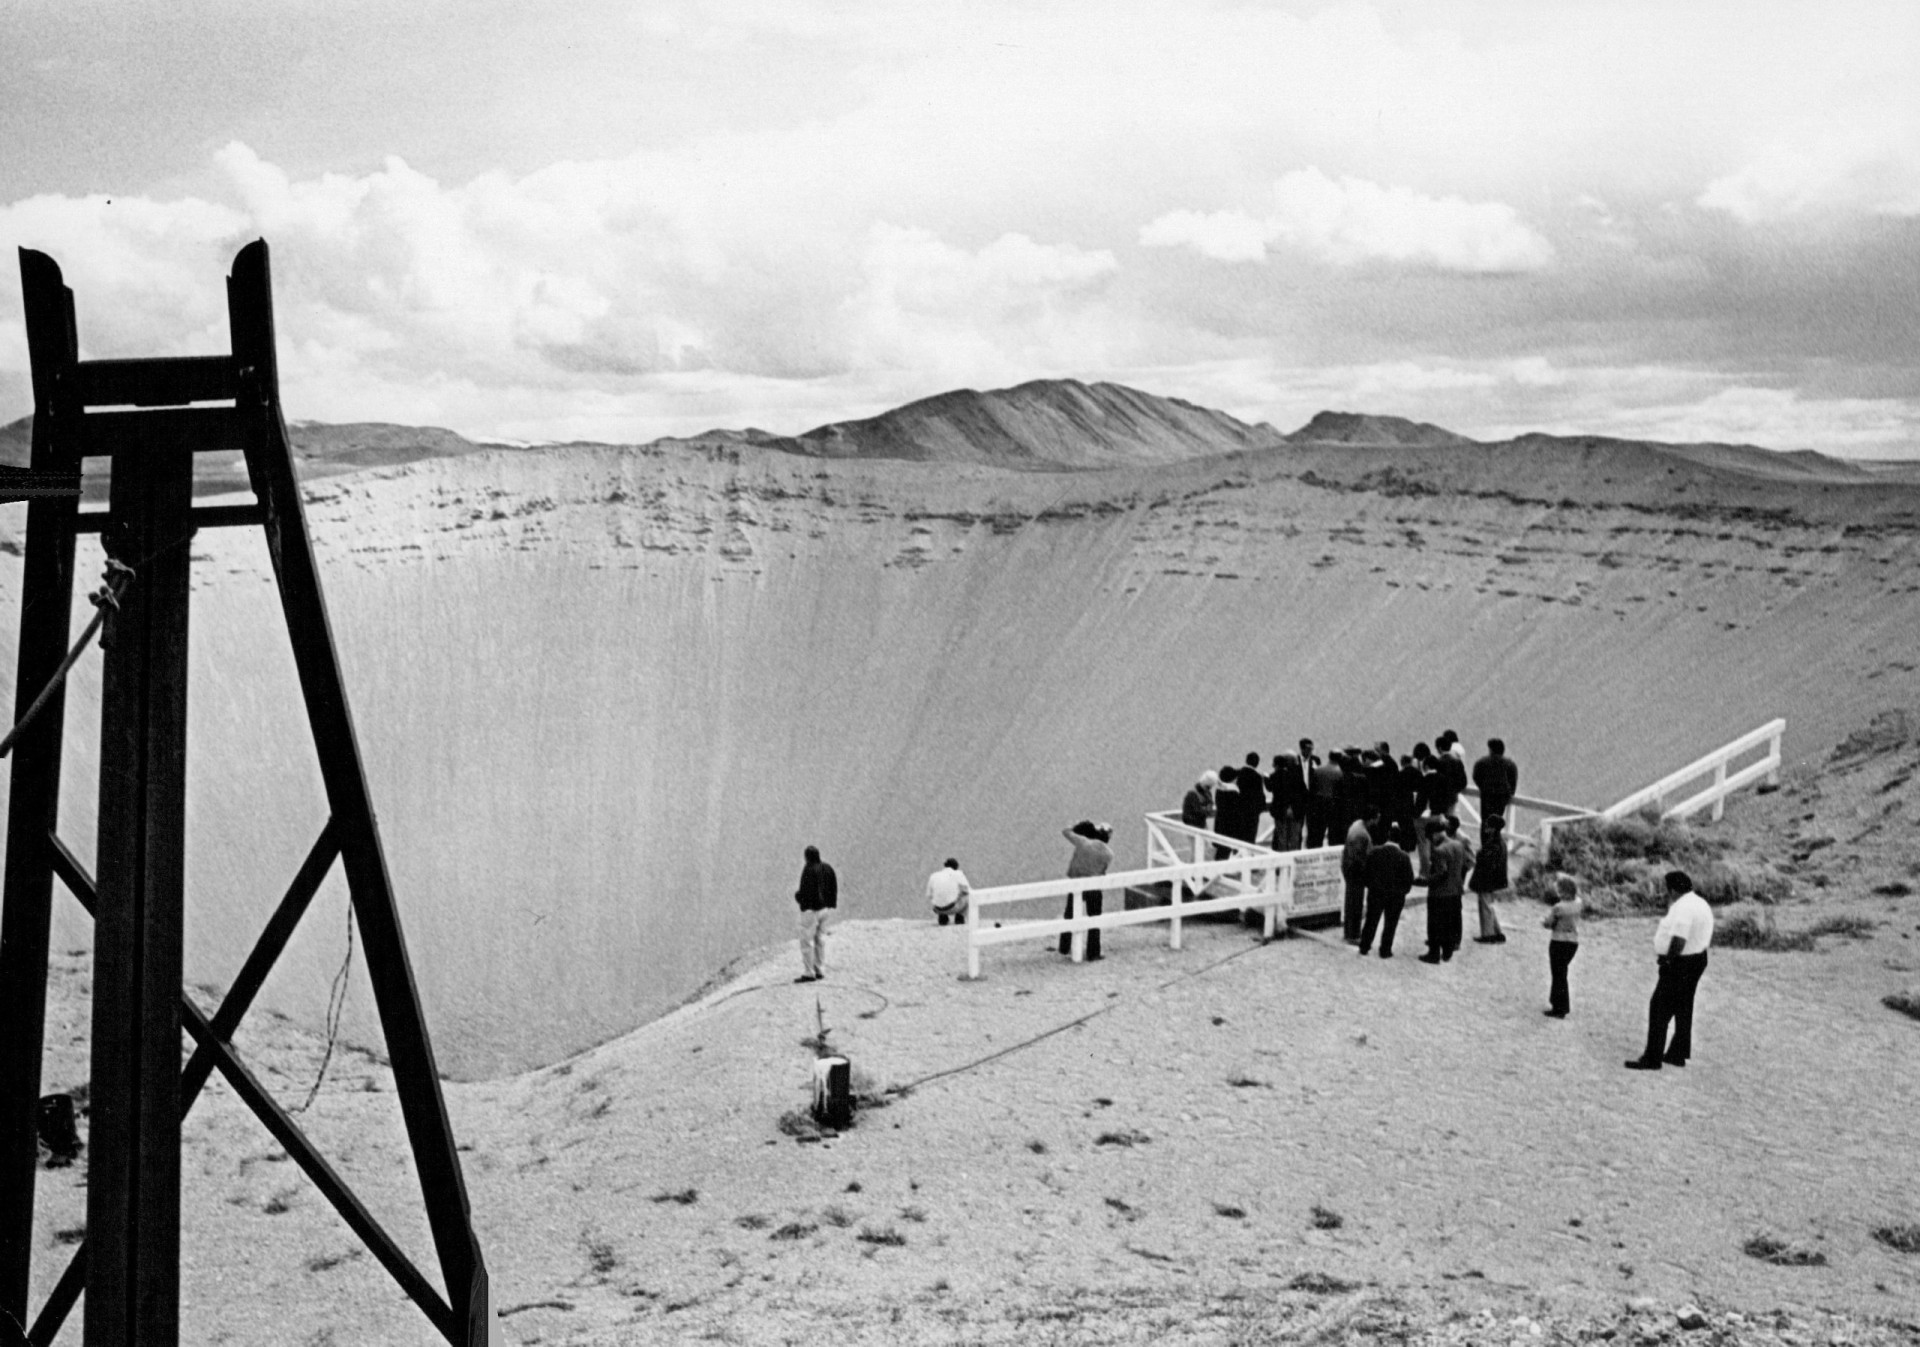 <p>In 1962, a shaft descending over 600 feet (182 m) into the desert floor was created, and the Sedan bomb was lowered into it. When the 104-kiloton bomb was detonated, it lifted the ground above it into a dome over 300 feet (91 m) high, sending a massive shockwave of dirt.</p><p>You may also like:<a href="https://www.starsinsider.com/n/319500?utm_source=msn.com&utm_medium=display&utm_campaign=referral_description&utm_content=686881en-us"> Gruesome Valentine's Day murders</a></p>